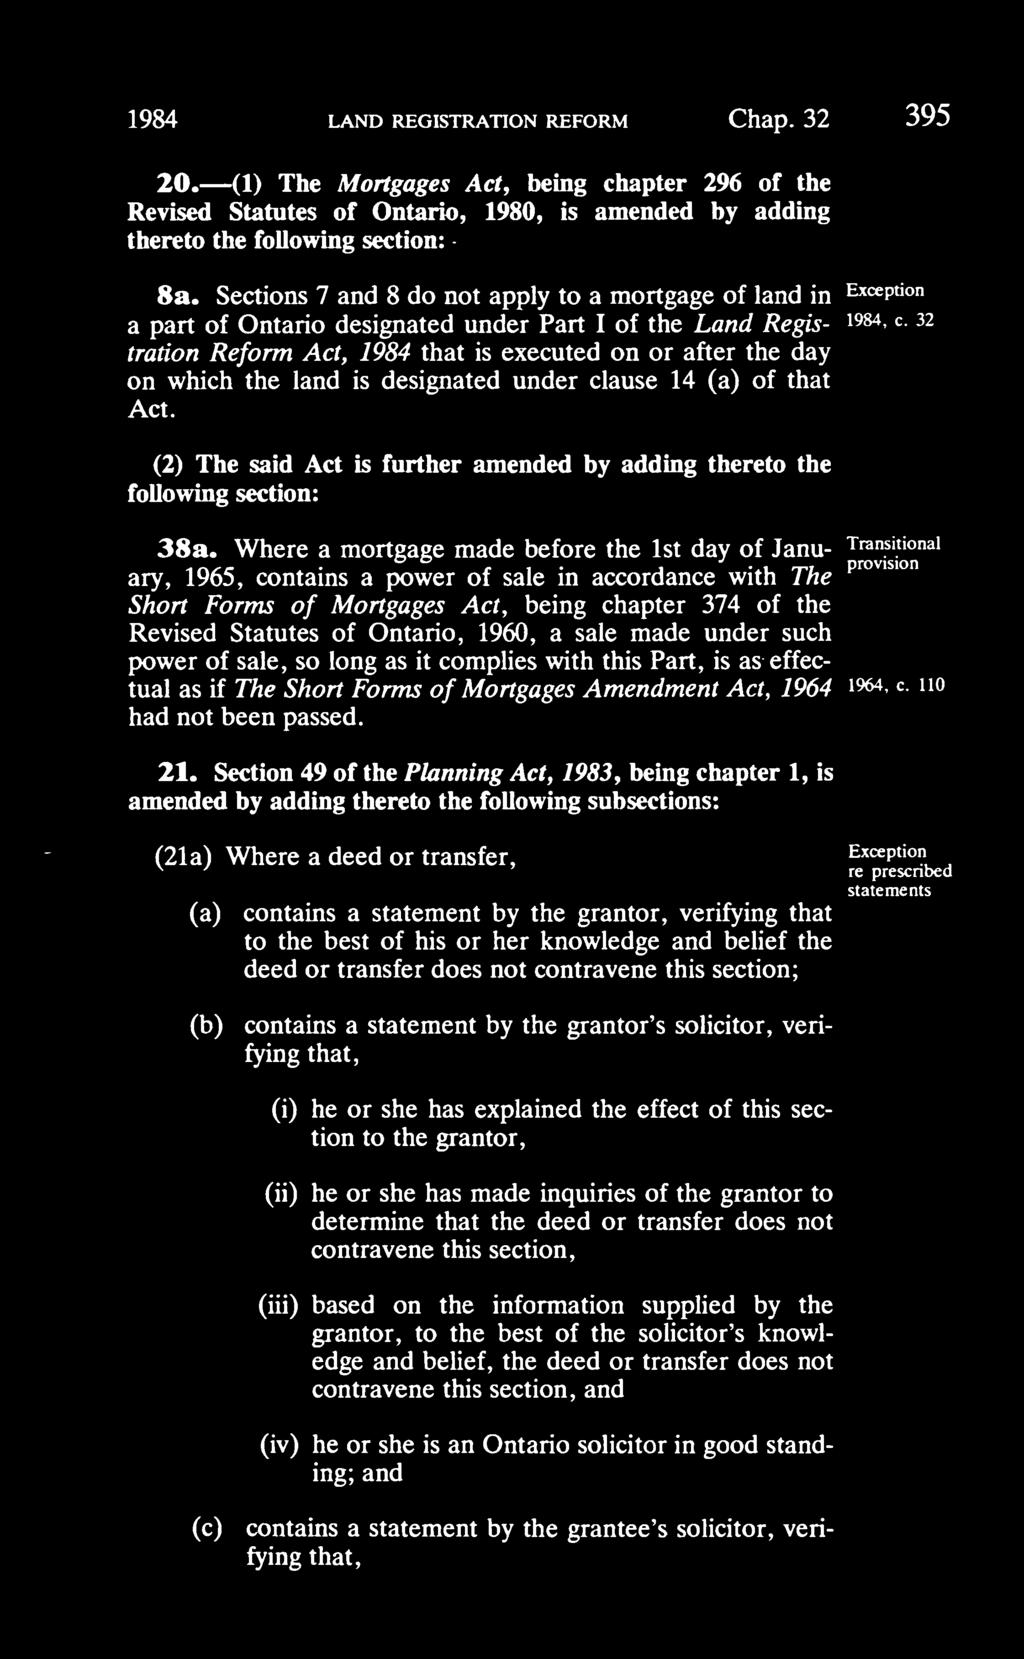 on which the land is designated under clause 14 (a) of that Act. (2) The said Act is further amended by adding thereto the following section: 38a.